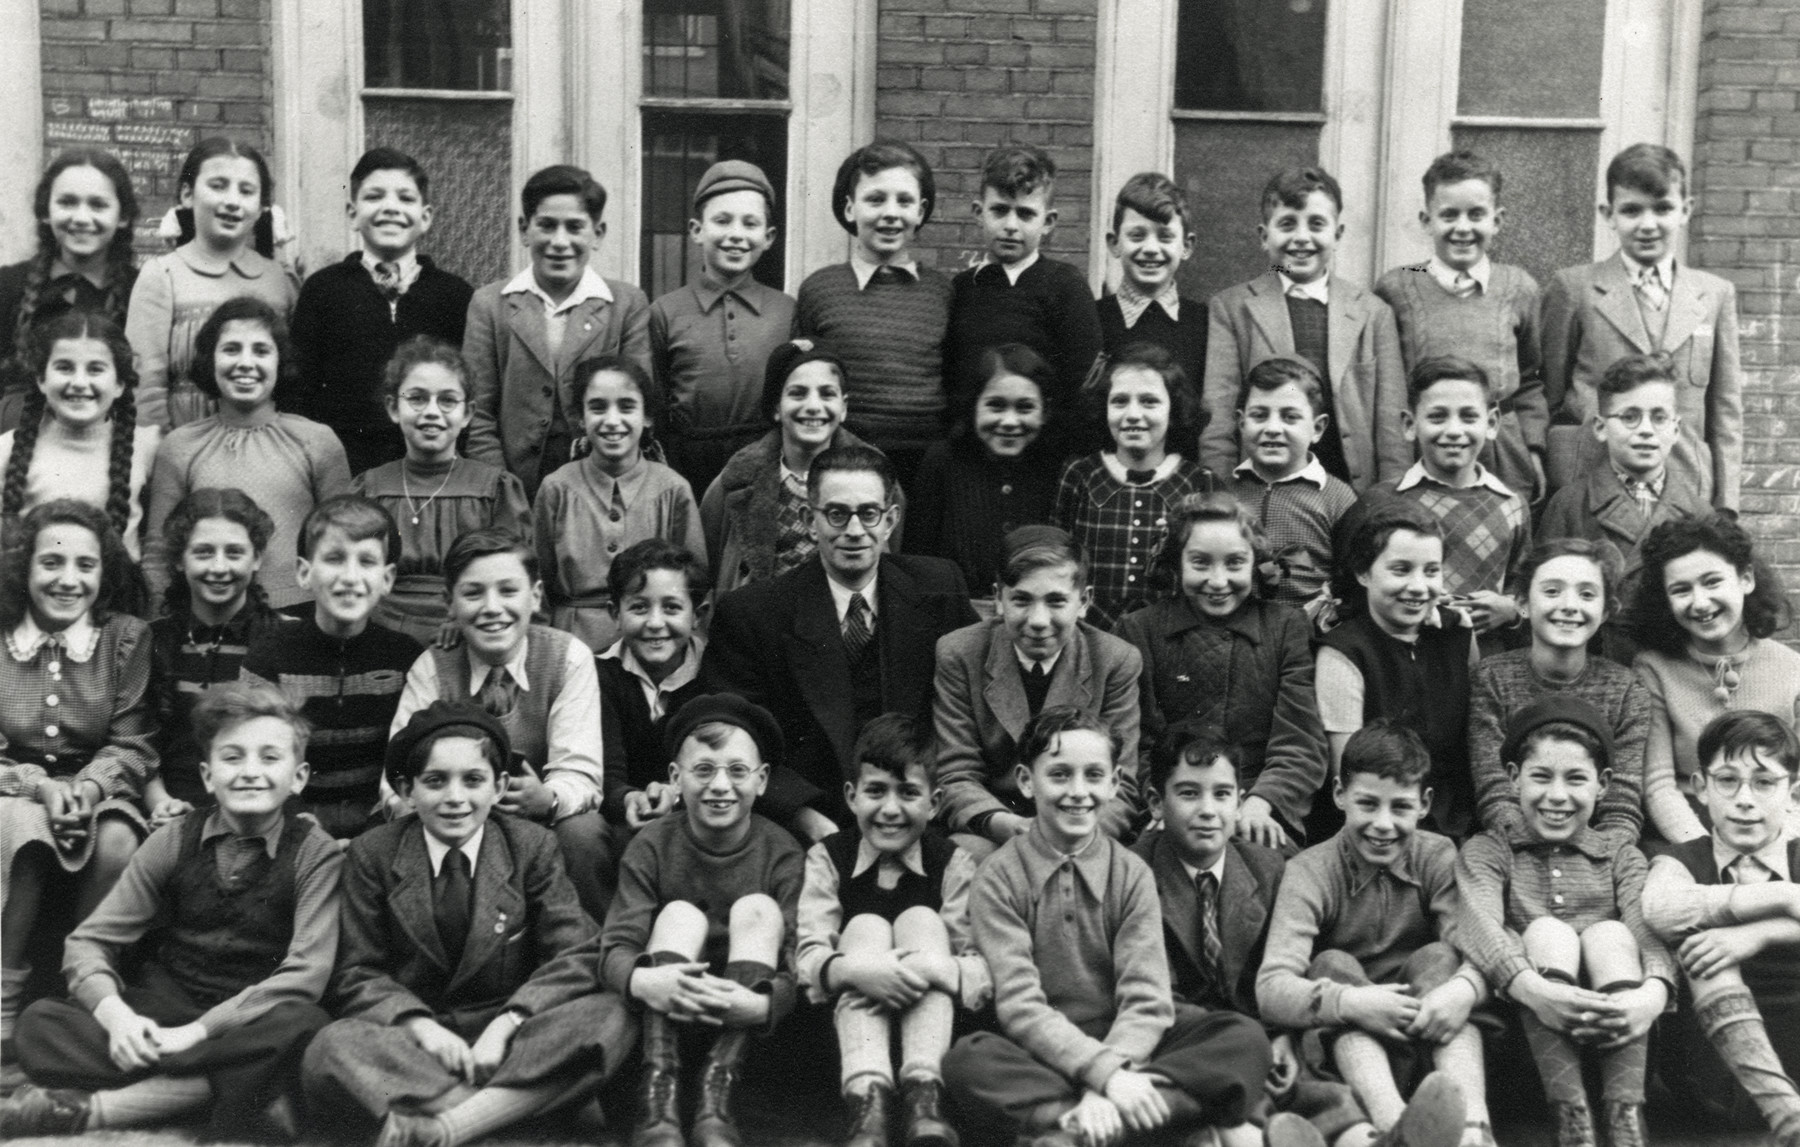 Group portrait of the students in 6th Form at Rosh Pinna Elementary School.  

Among those pictured are Terry Gans and Jossi Optsfeld.